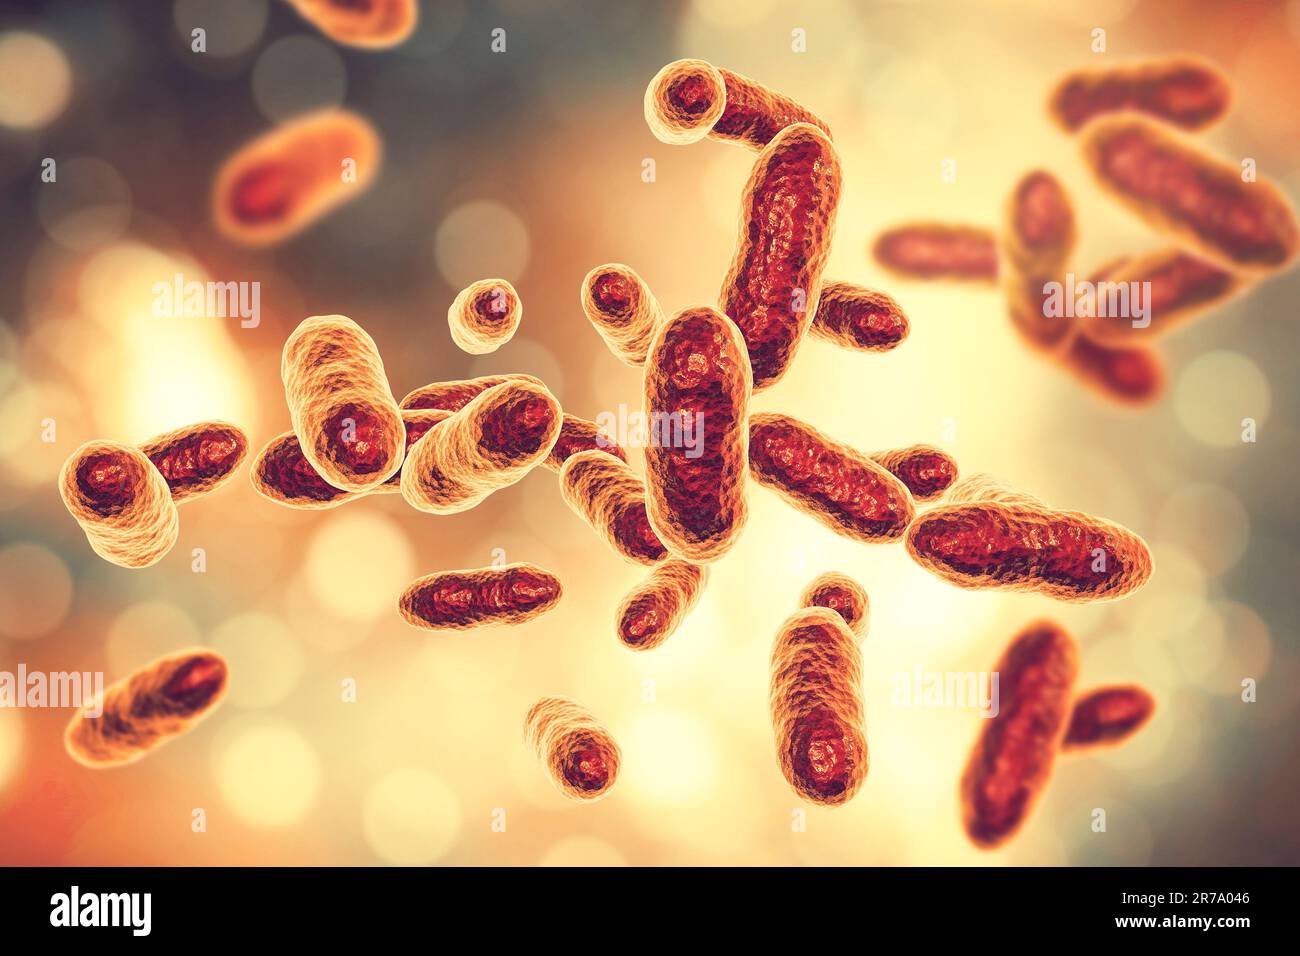 Tannerella forsythia bacteria, 3D illustration. Gram-negative anaerobic bacteria that cause periodontal diseases and have found to be associated with Stock Photo